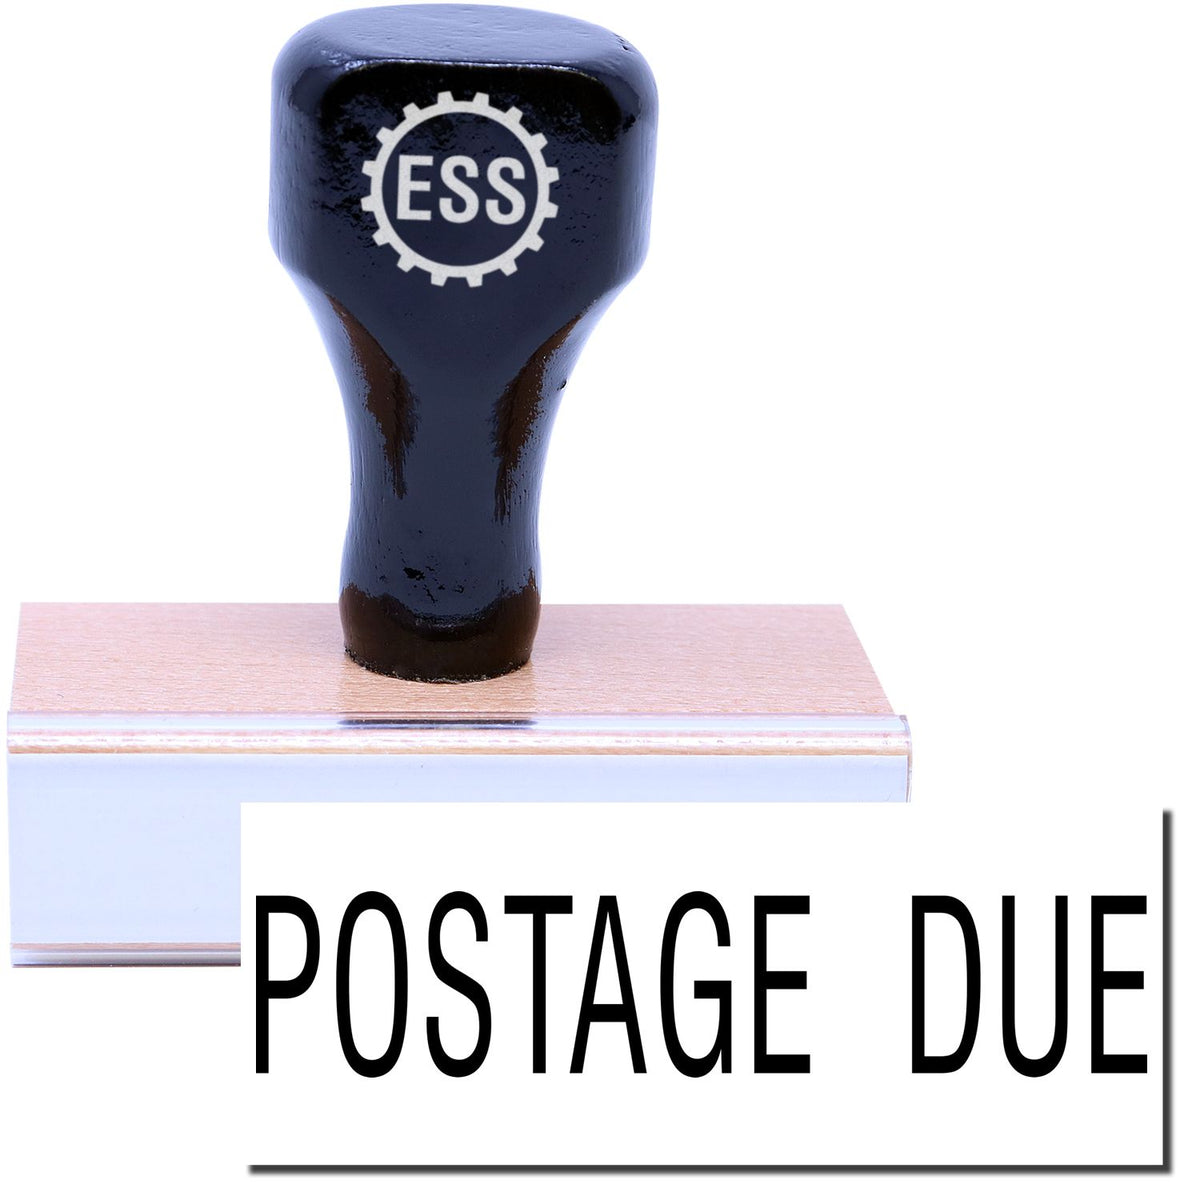 A stock office rubber stamp with a stamped image showing how the text &quot;POSTAGE DUE&quot; is displayed after stamping.